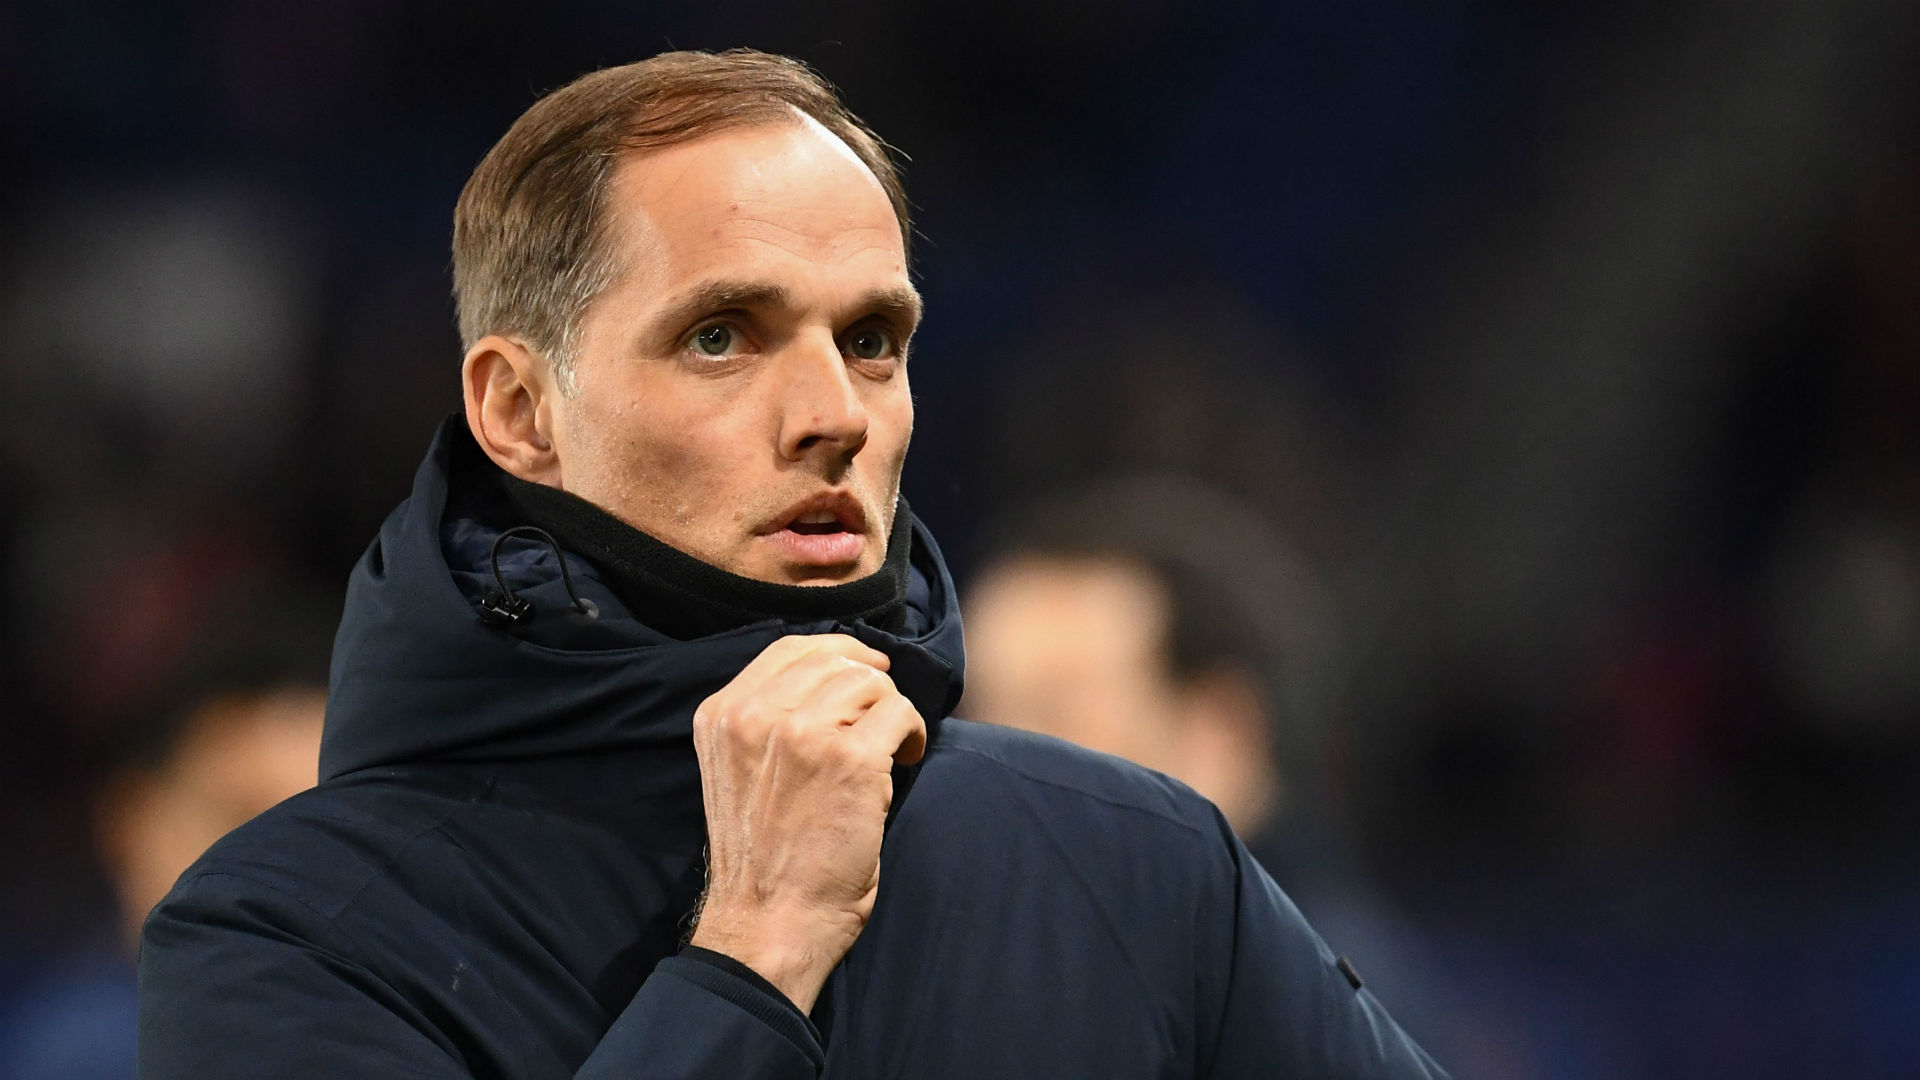 Paris Saint-Germain must pull together in one direction to improve - Tuchel